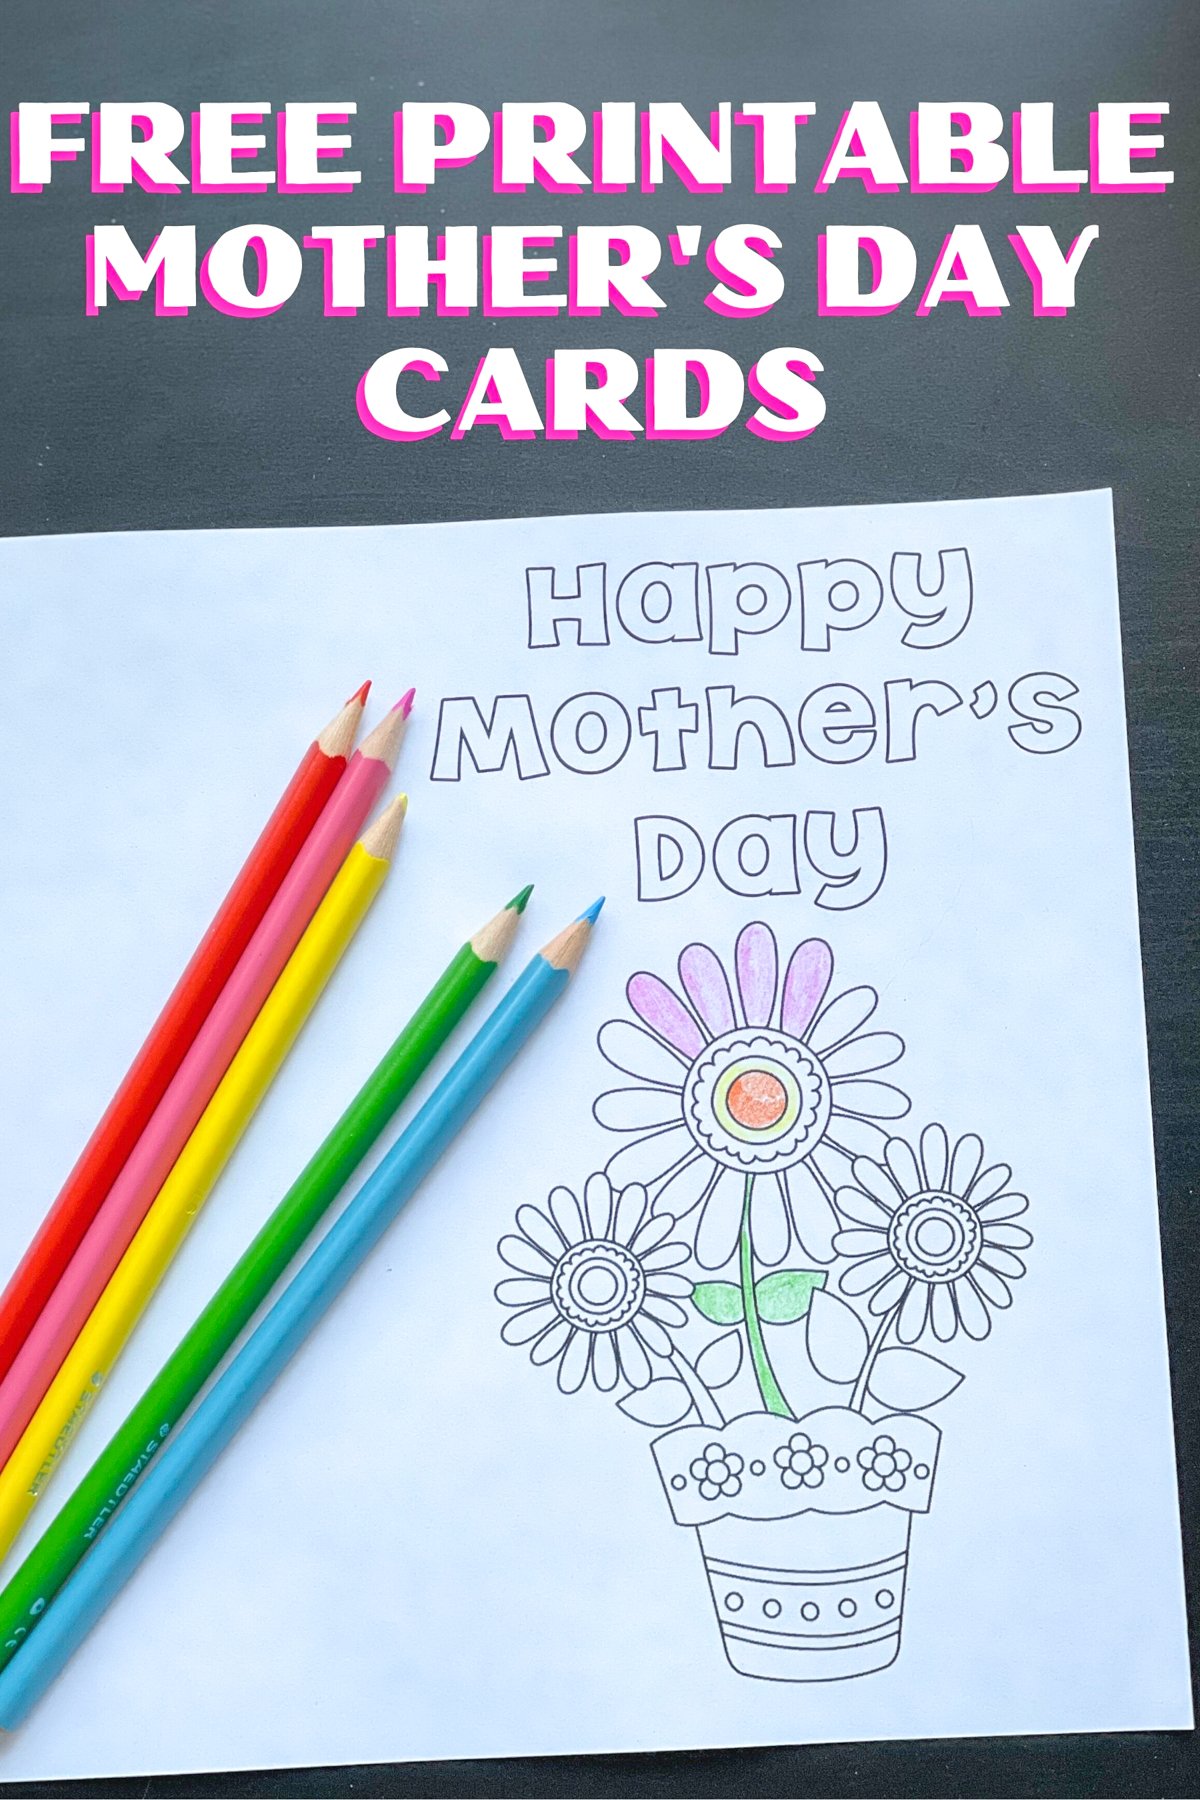 FREE PRINTABLE MOTHER'S DAY CARDS.